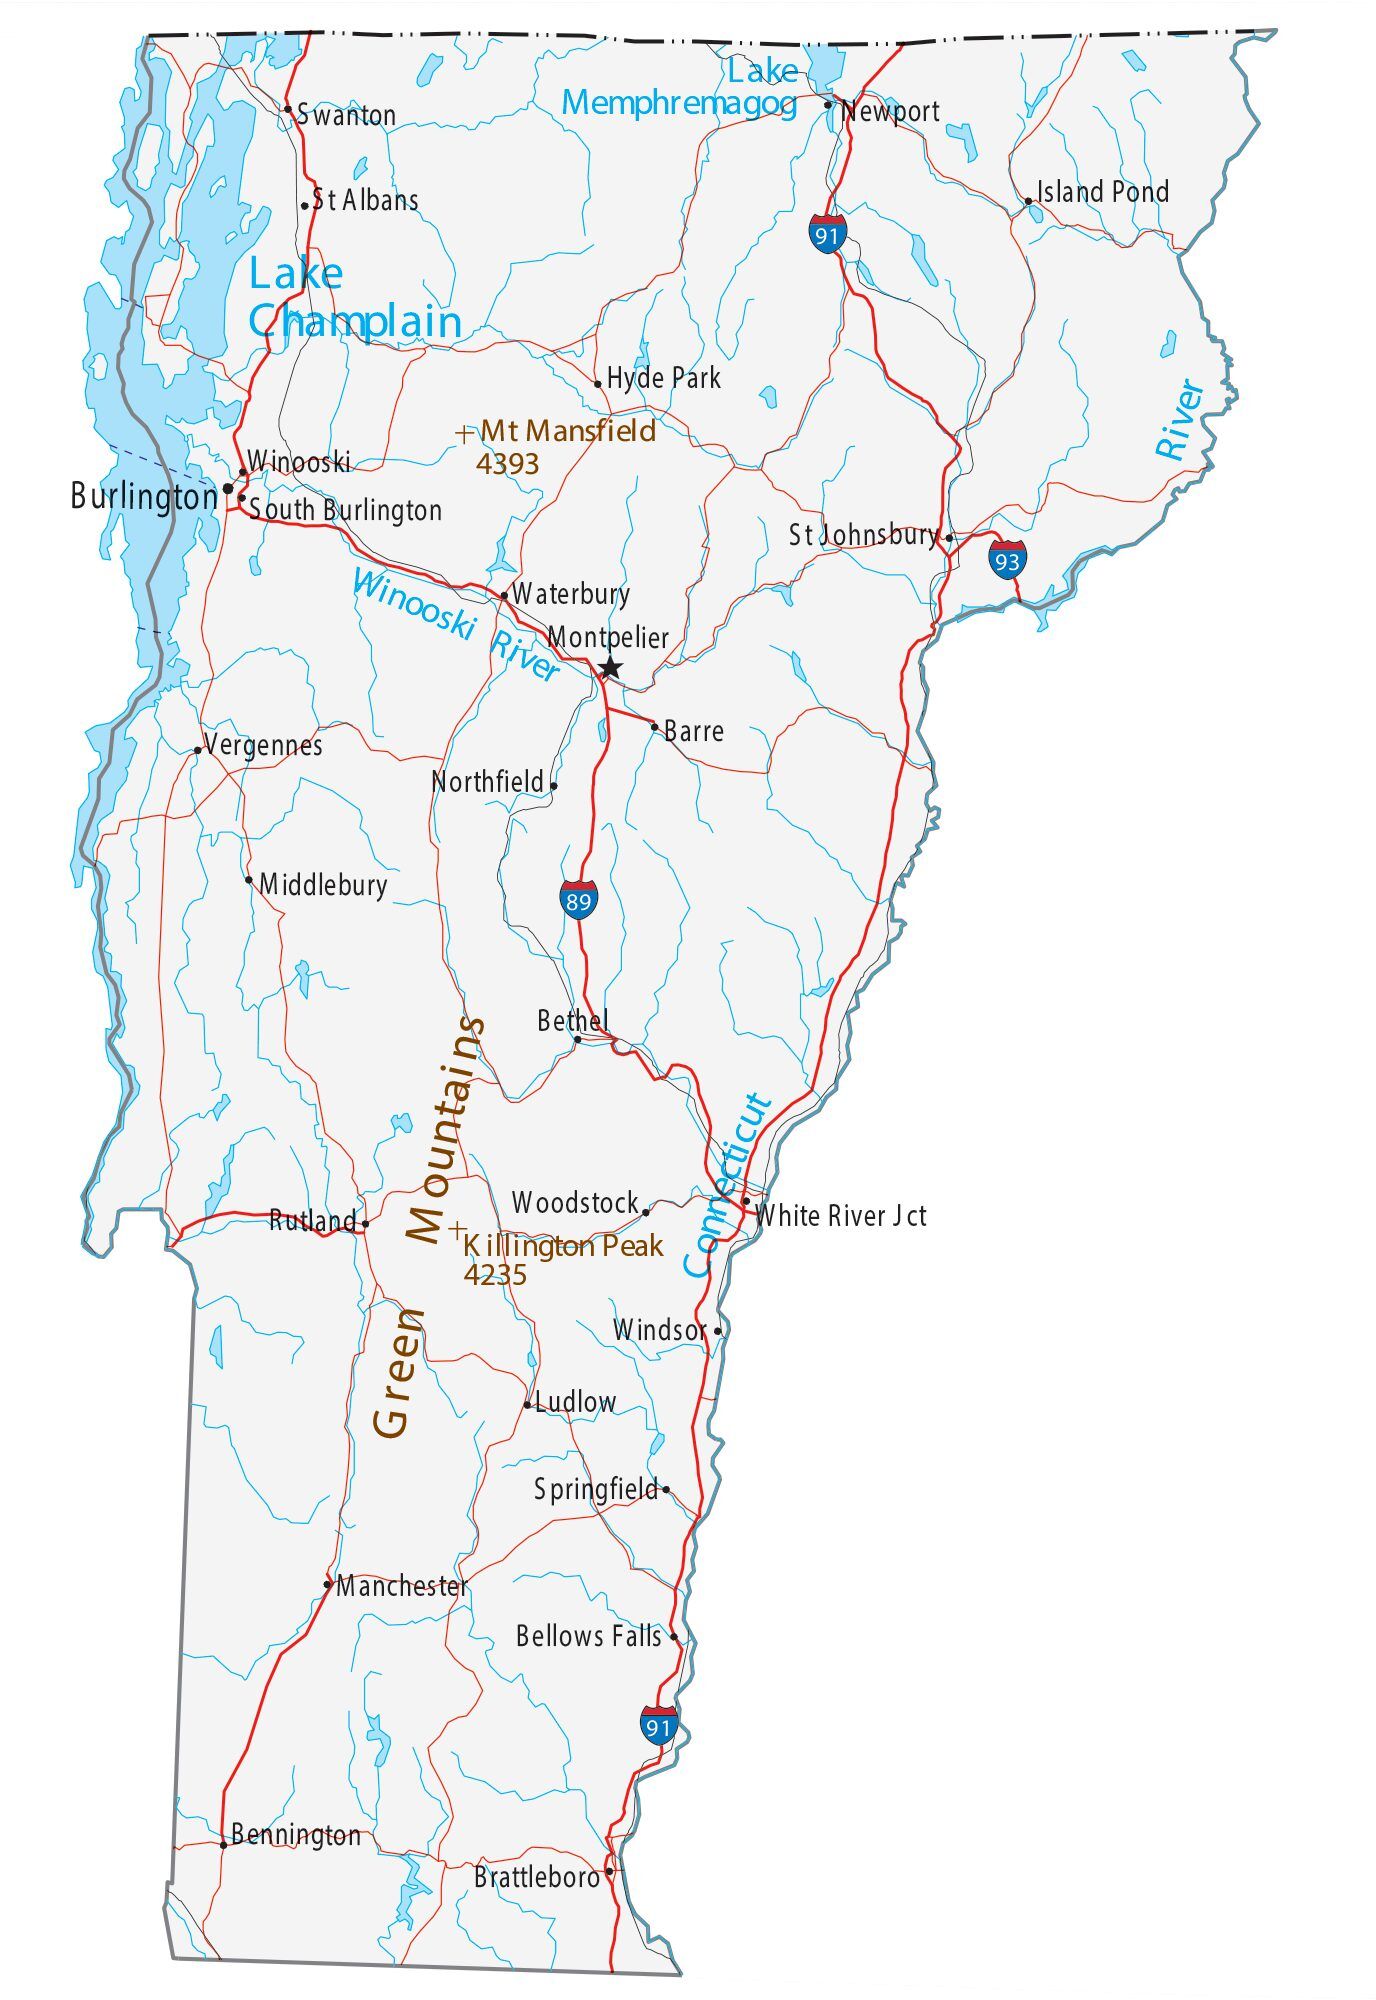 Map of Vermont - Cities and Roads - GIS Geography